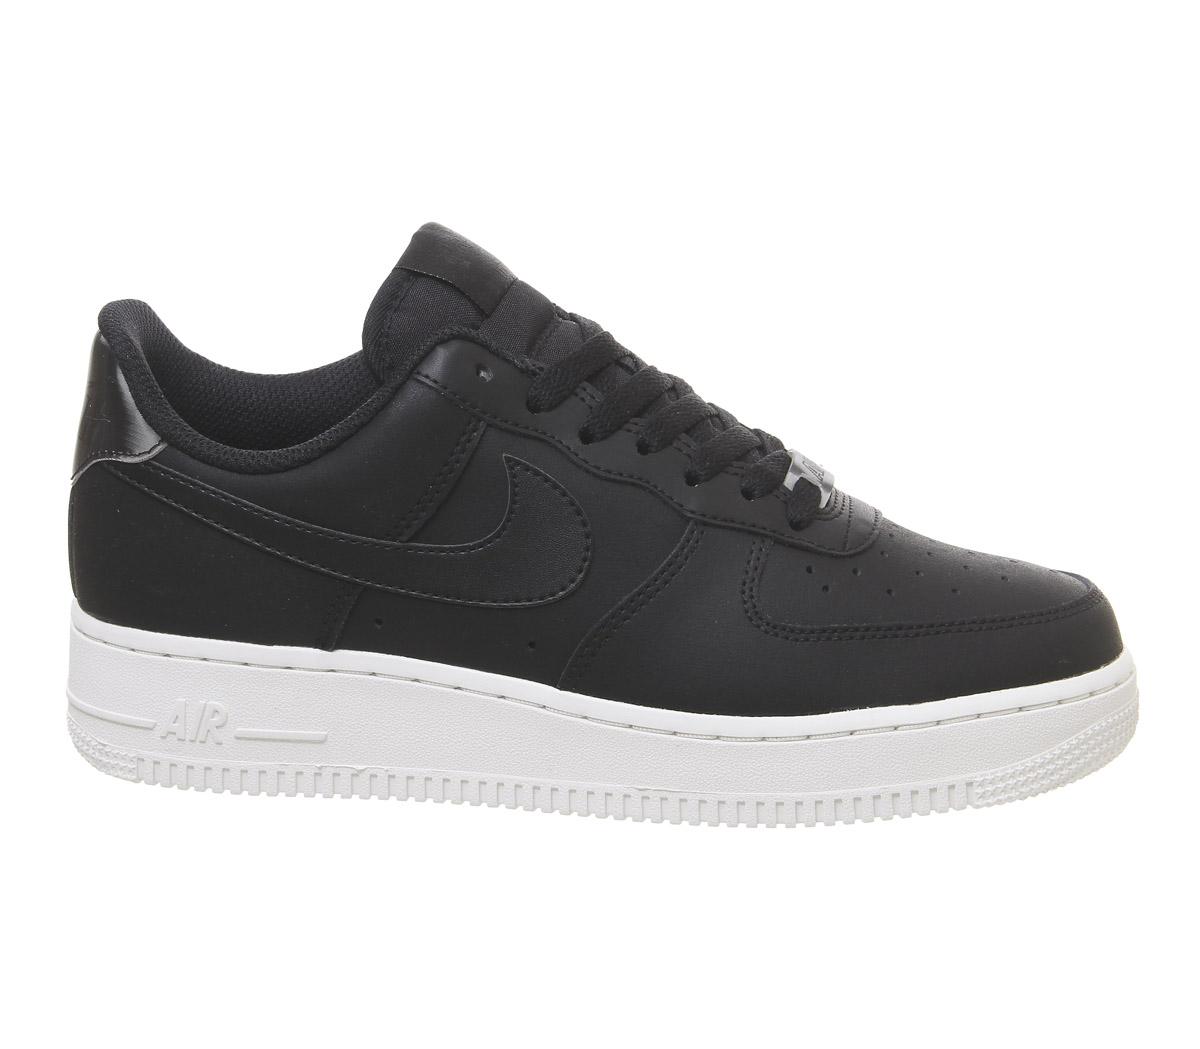 Nike Air Force 1 07 Trainers Black Black Summit White - Women's Trainers